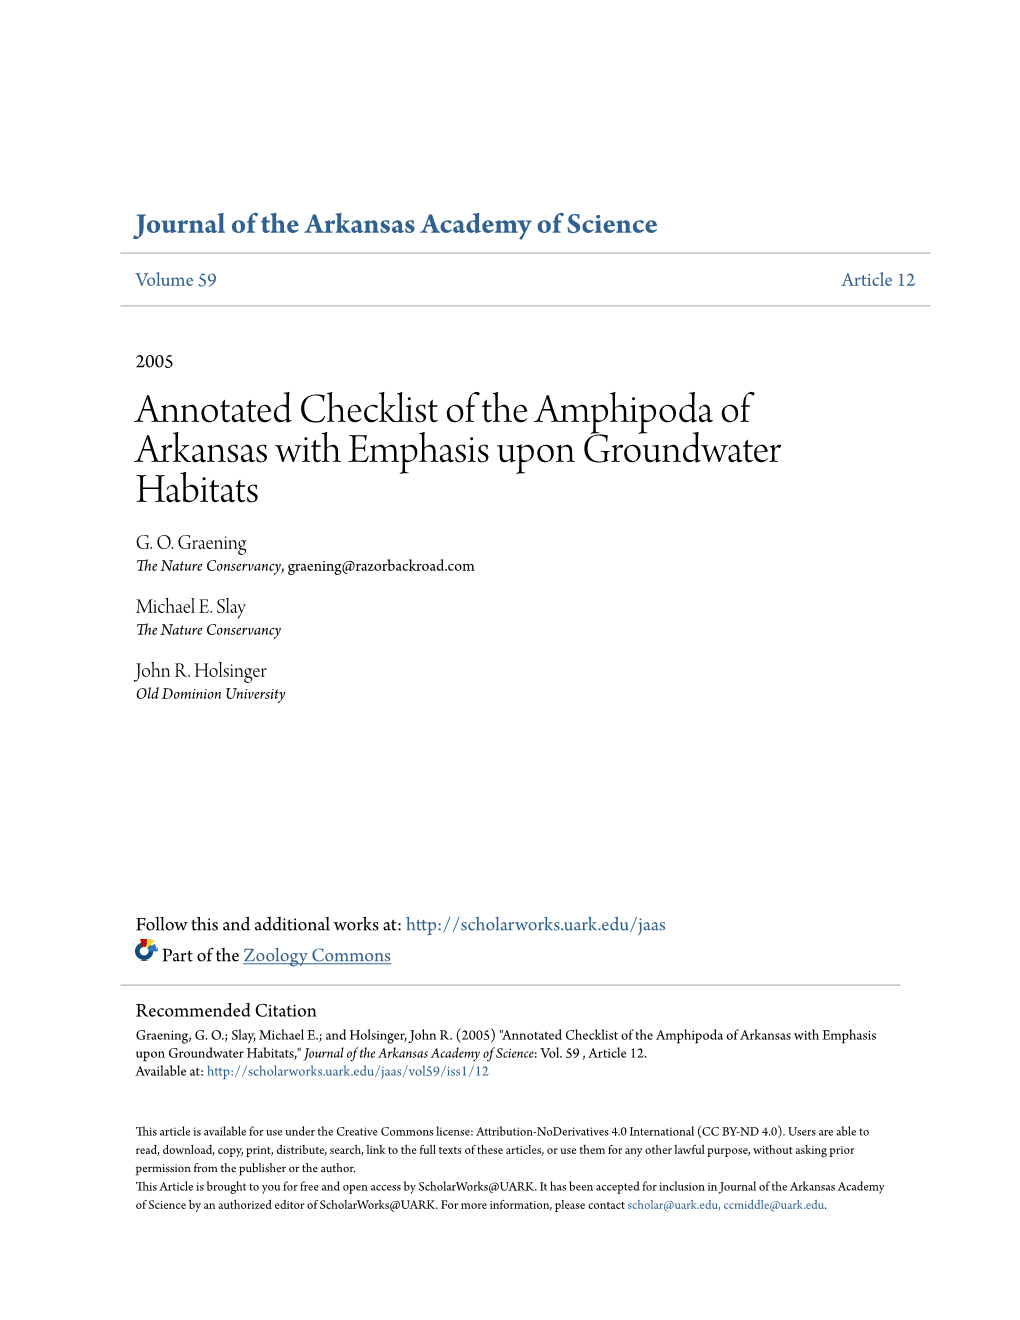 Annotated Checklist of the Amphipoda of Arkansas with Emphasis Upon Groundwater Habitats G